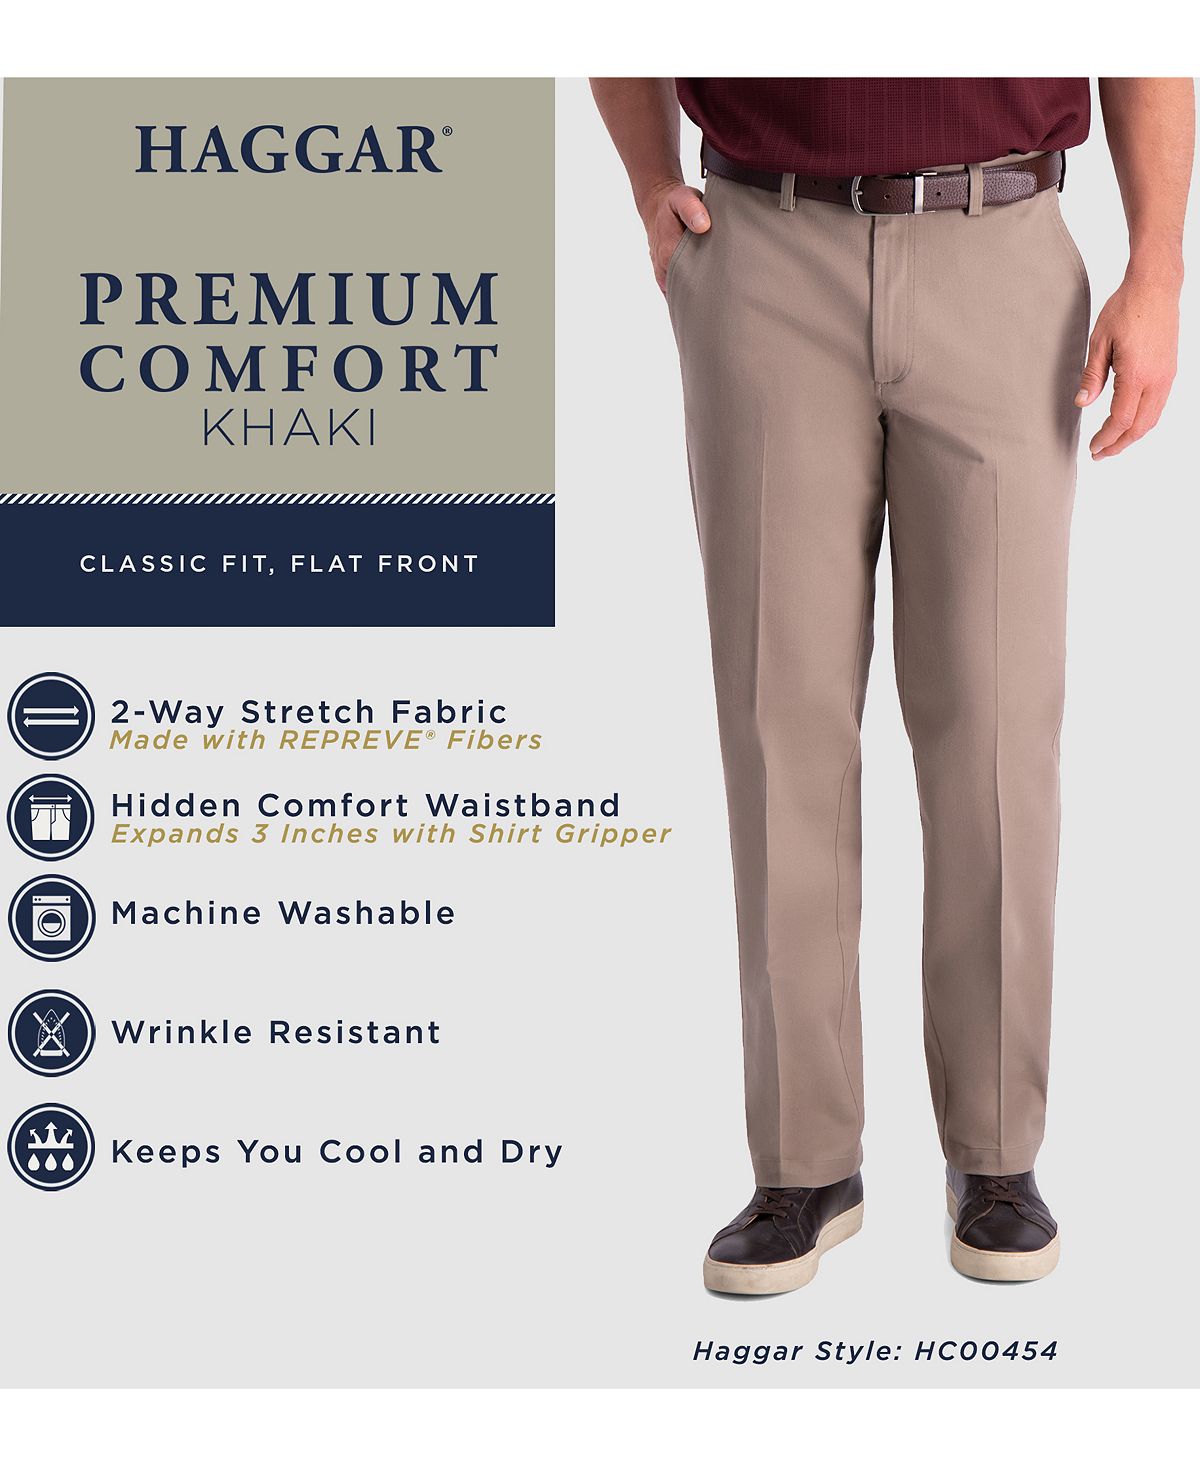 Haggar Premium Comfort Khaki Classic-fit 2-way Stretch Wrinkle Resistant Flat Front Stretch Casual Pants Black